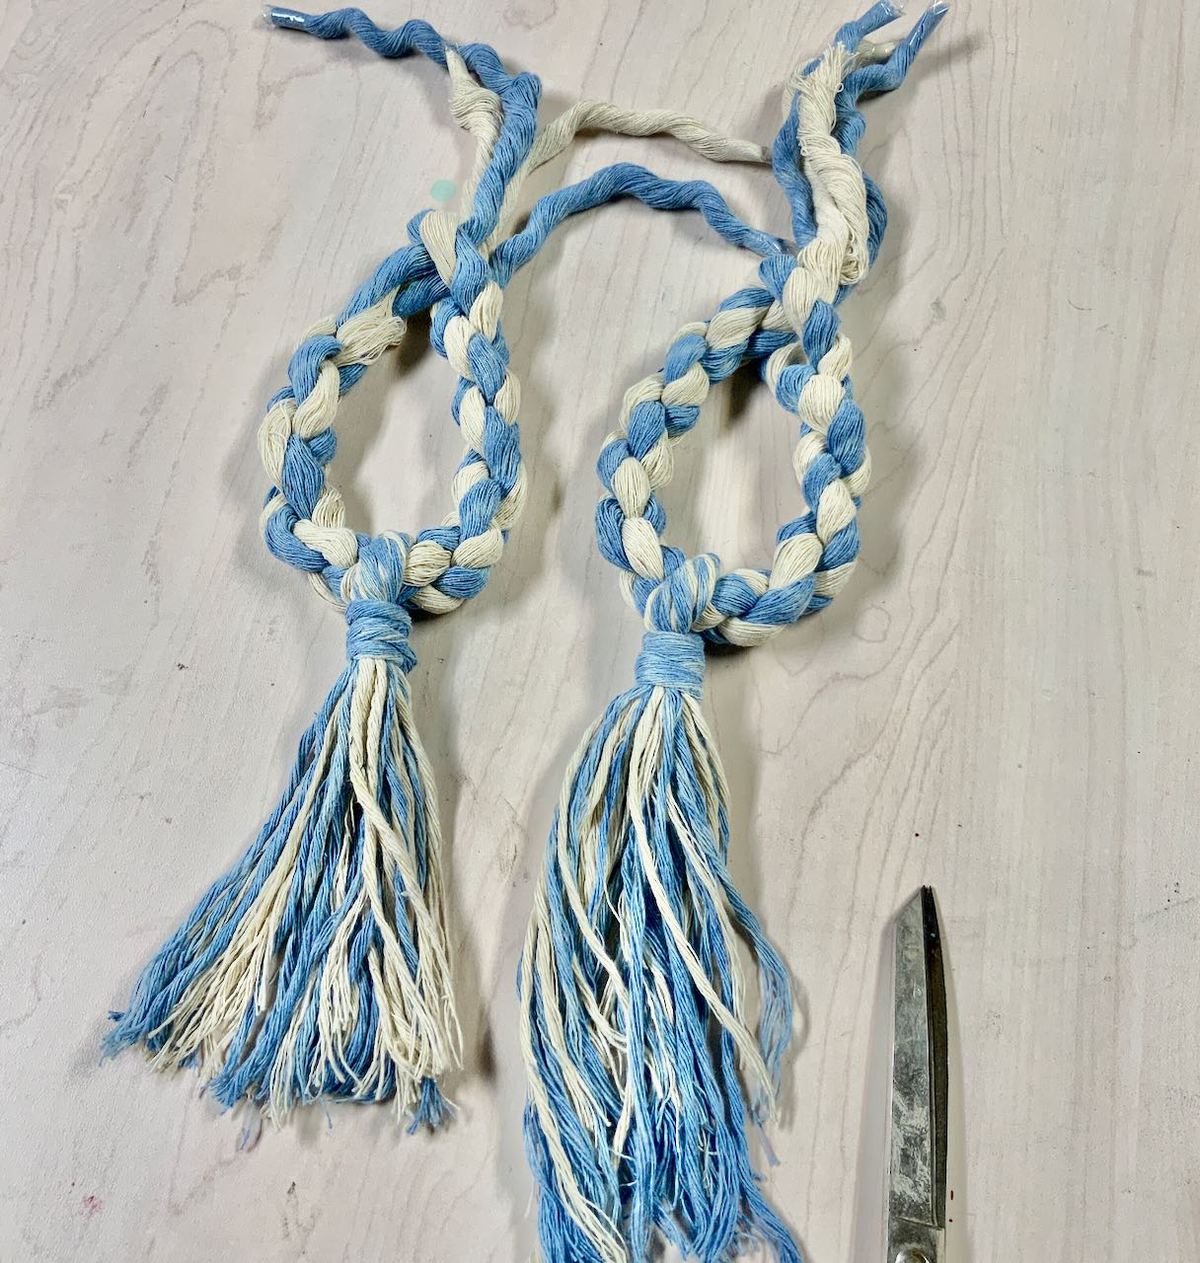 two ties backs with tassels on table showing one trimmed and one not.